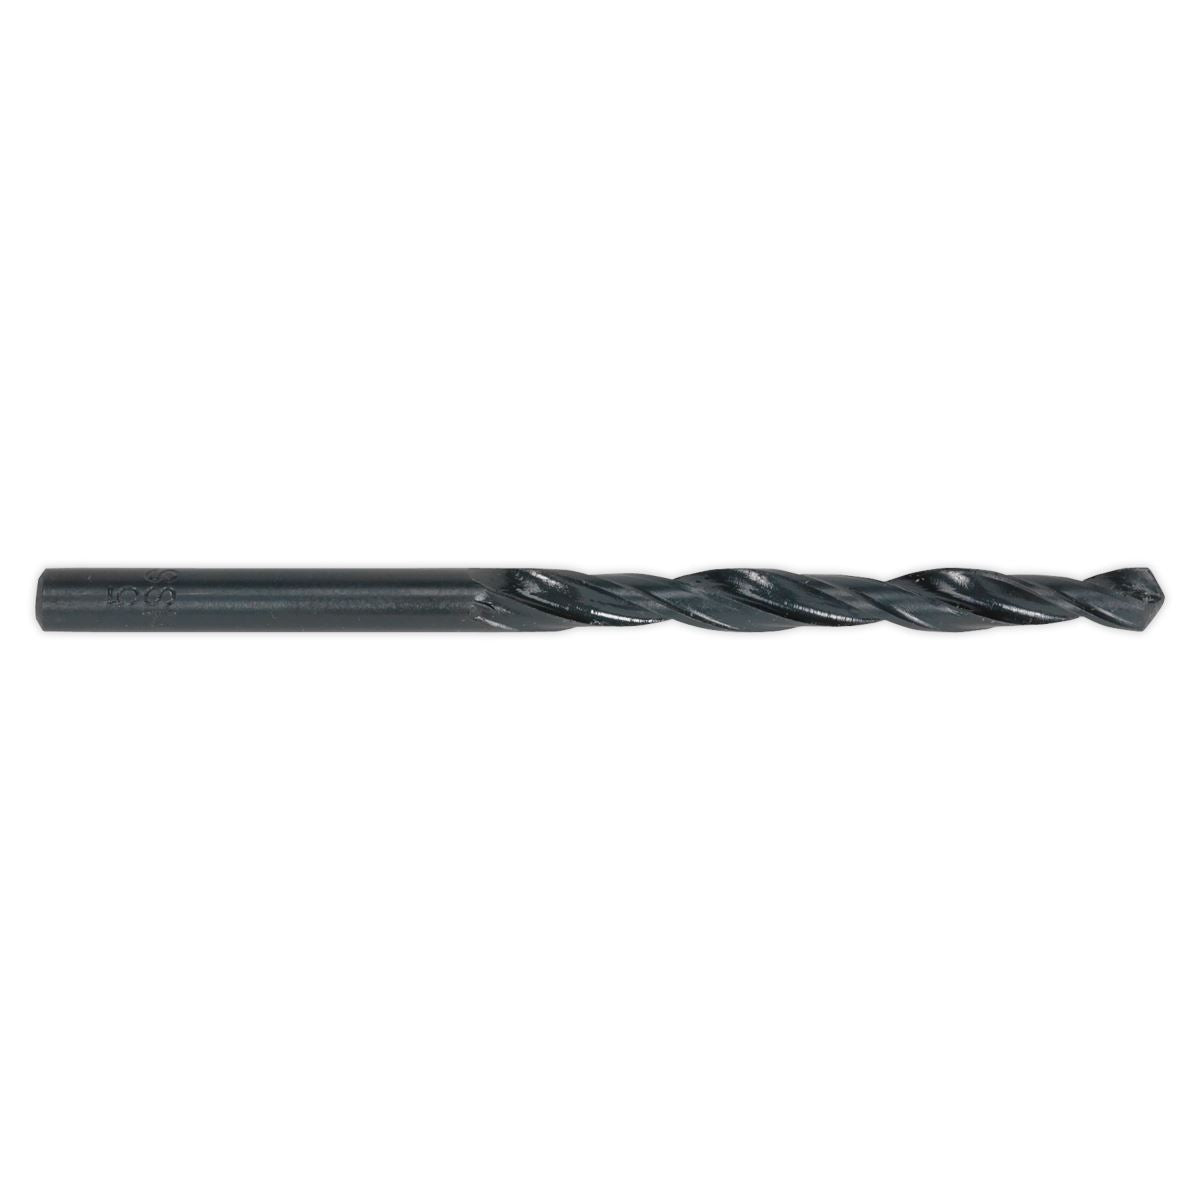 Sealey HSS Roll Forged Drill Bit Ø3mm Pack of 10